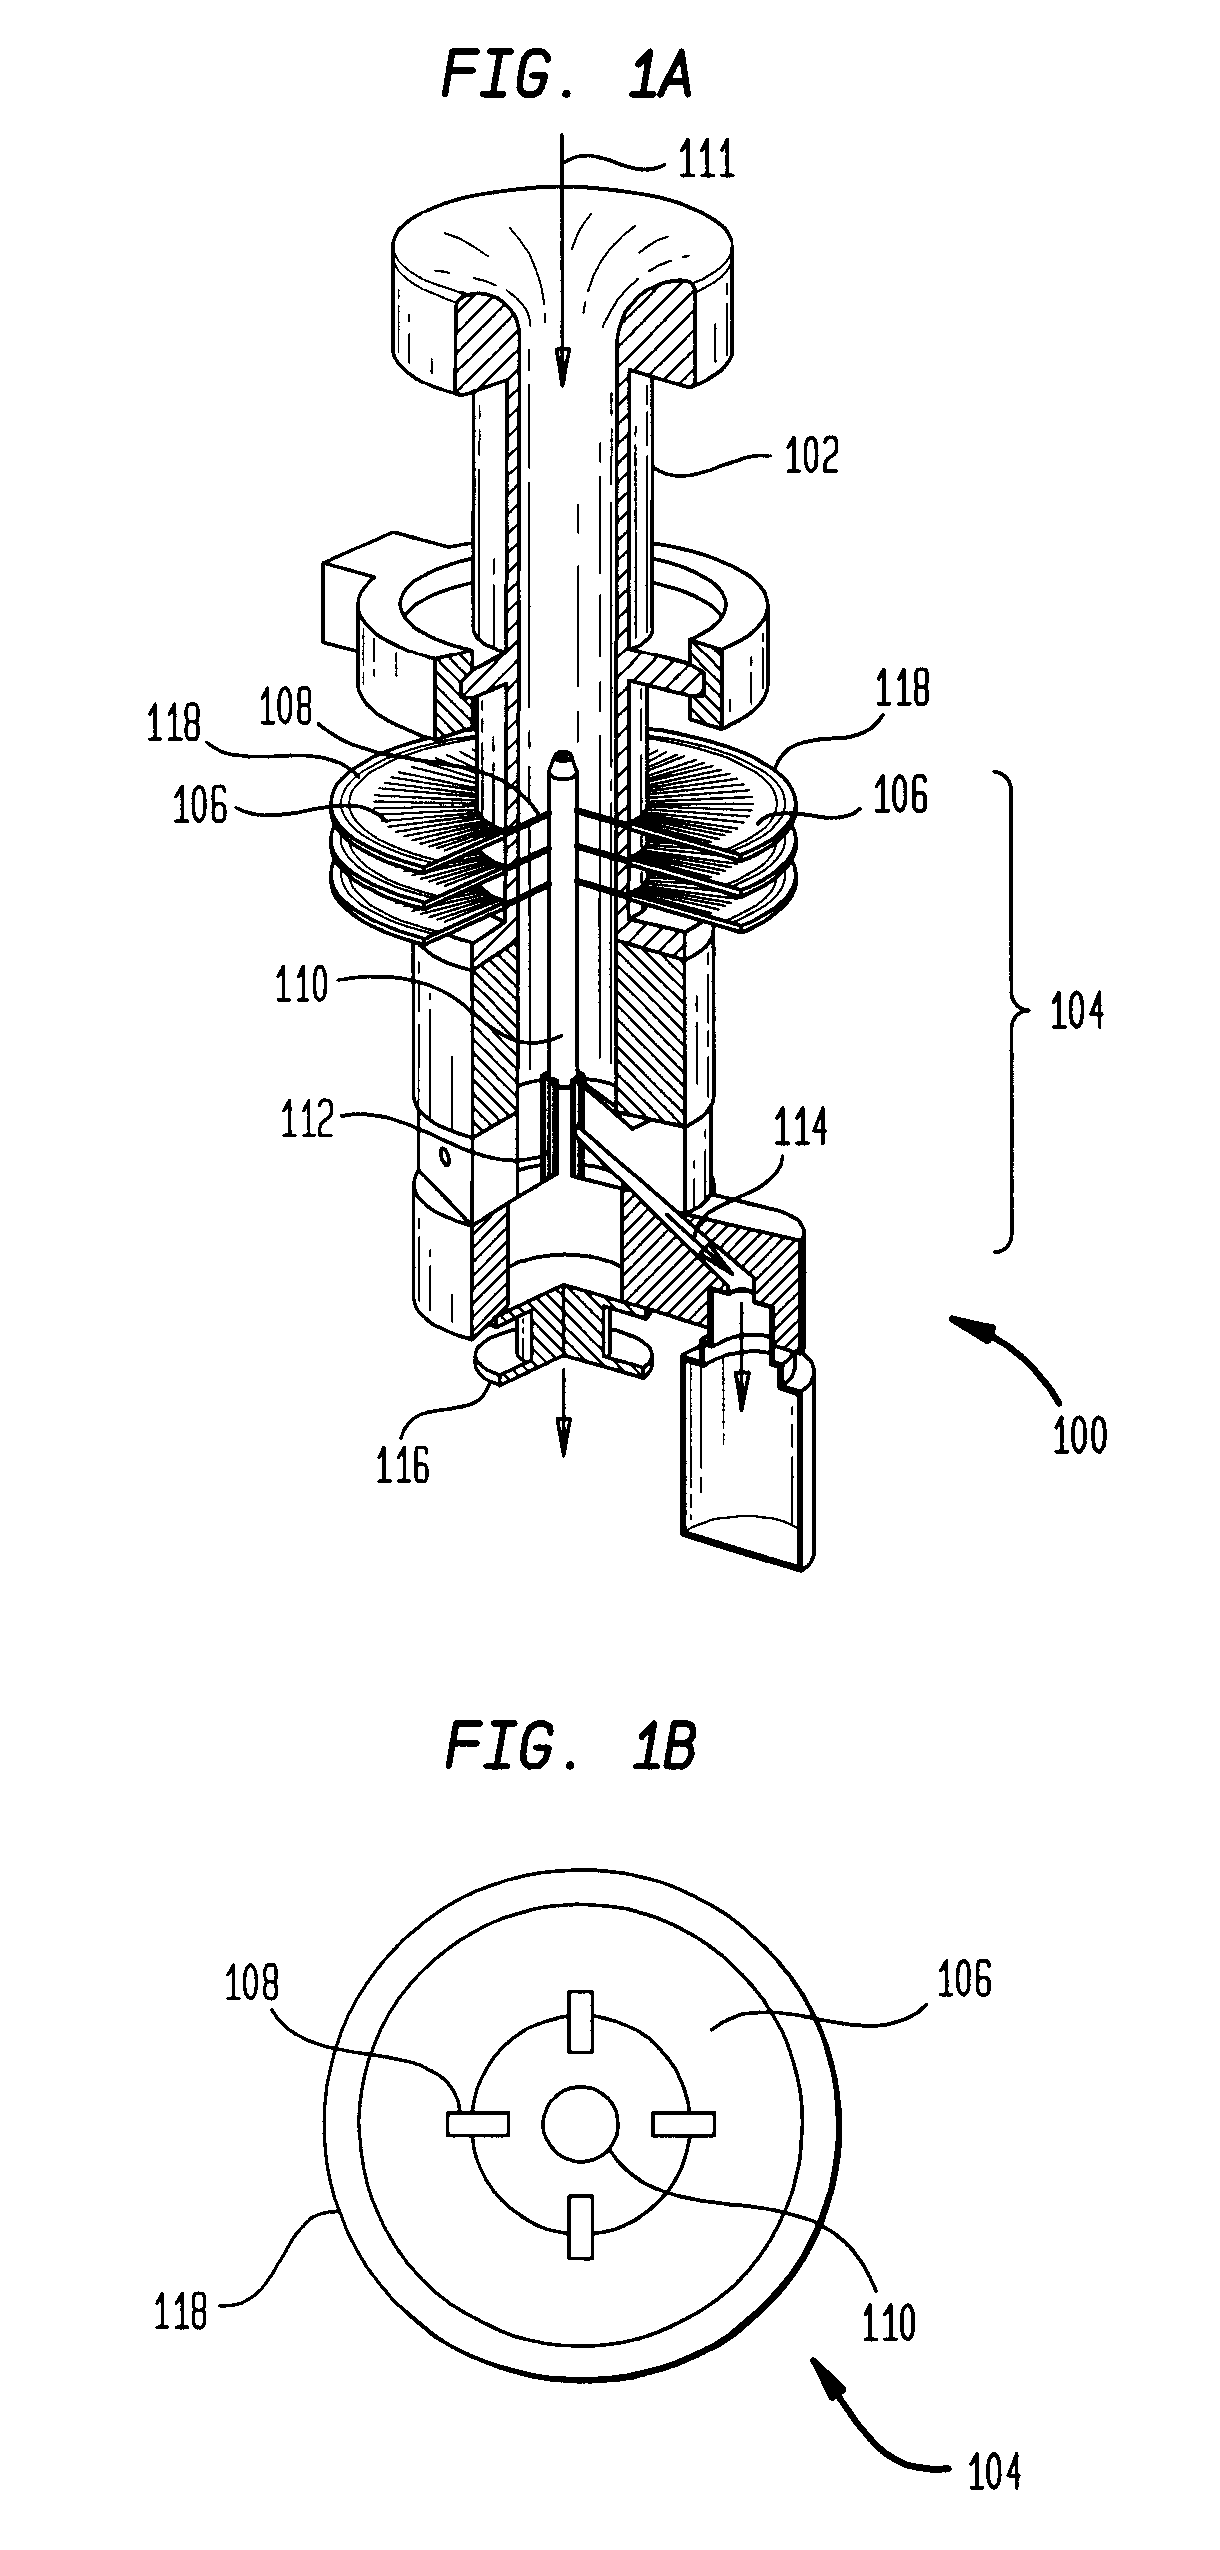 Ballast circuit for electrostatic particle collection systems